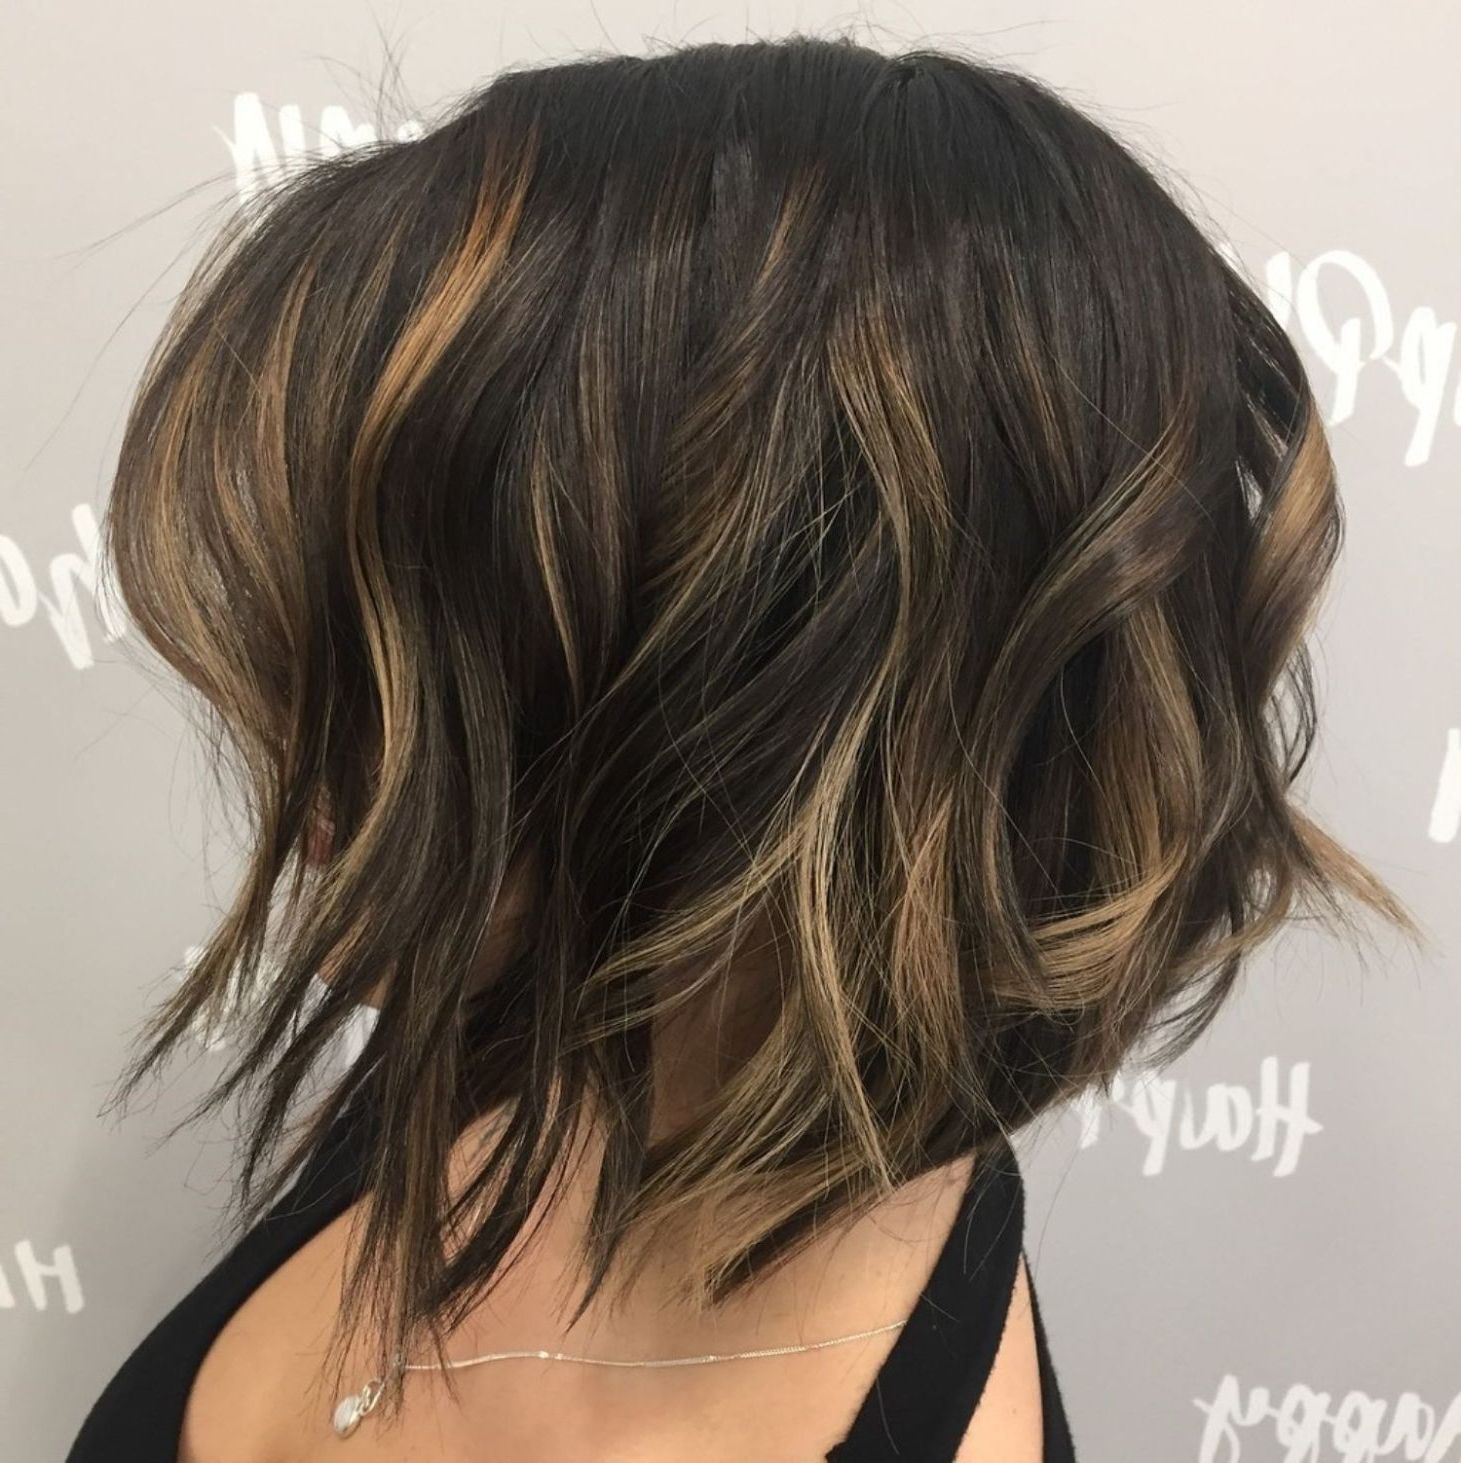 60 Messy Bob Hairstyles For Your Trendy Casual Looks | Hair Styles With Regard To Inverted Brunette Bob Hairstyles With Messy Curls (View 2 of 20)